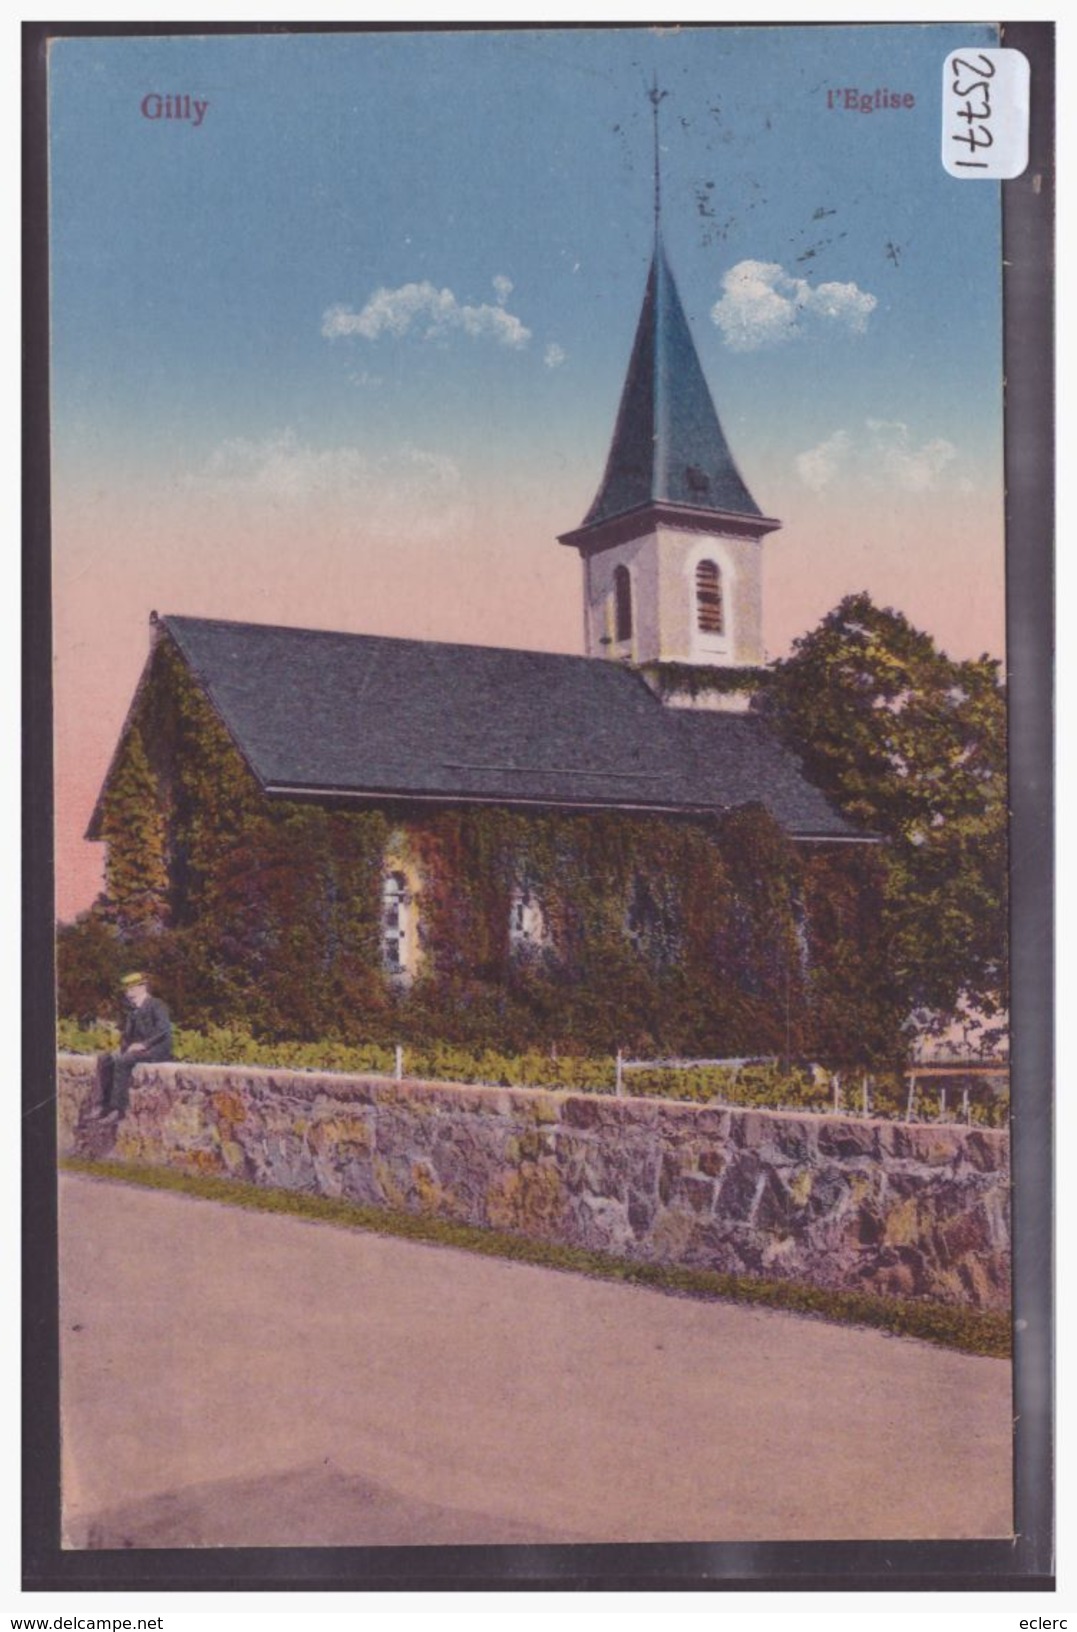 DISTRICT DE ROLLE - GILLY - L'EGLISE - TB - Gilly